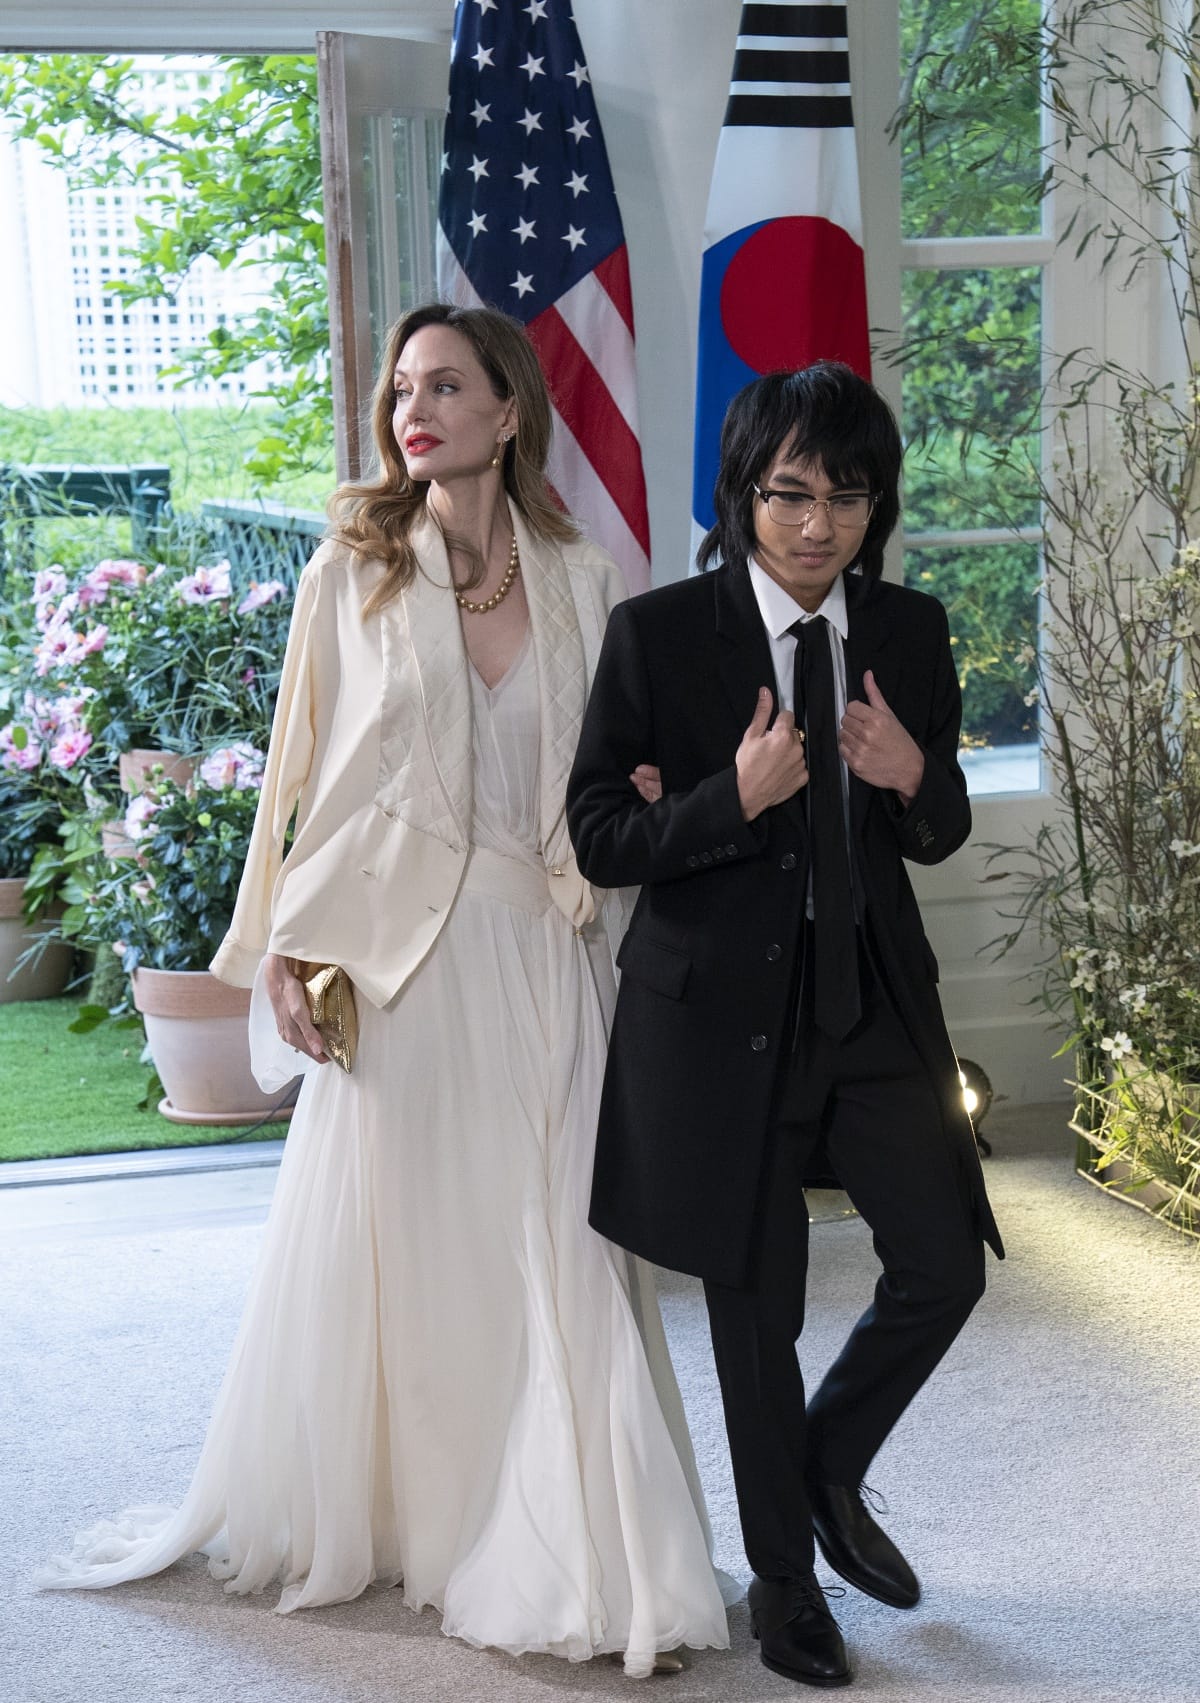 Angelina Jolie arriving with son Maddox Jolie-Pitt at the State Dinner hosted by United States President Joe Biden and First Lady Dr. Jill Biden in honor of South Korean President Yoon Suk Yeol and First Lady Kim Keon Hee